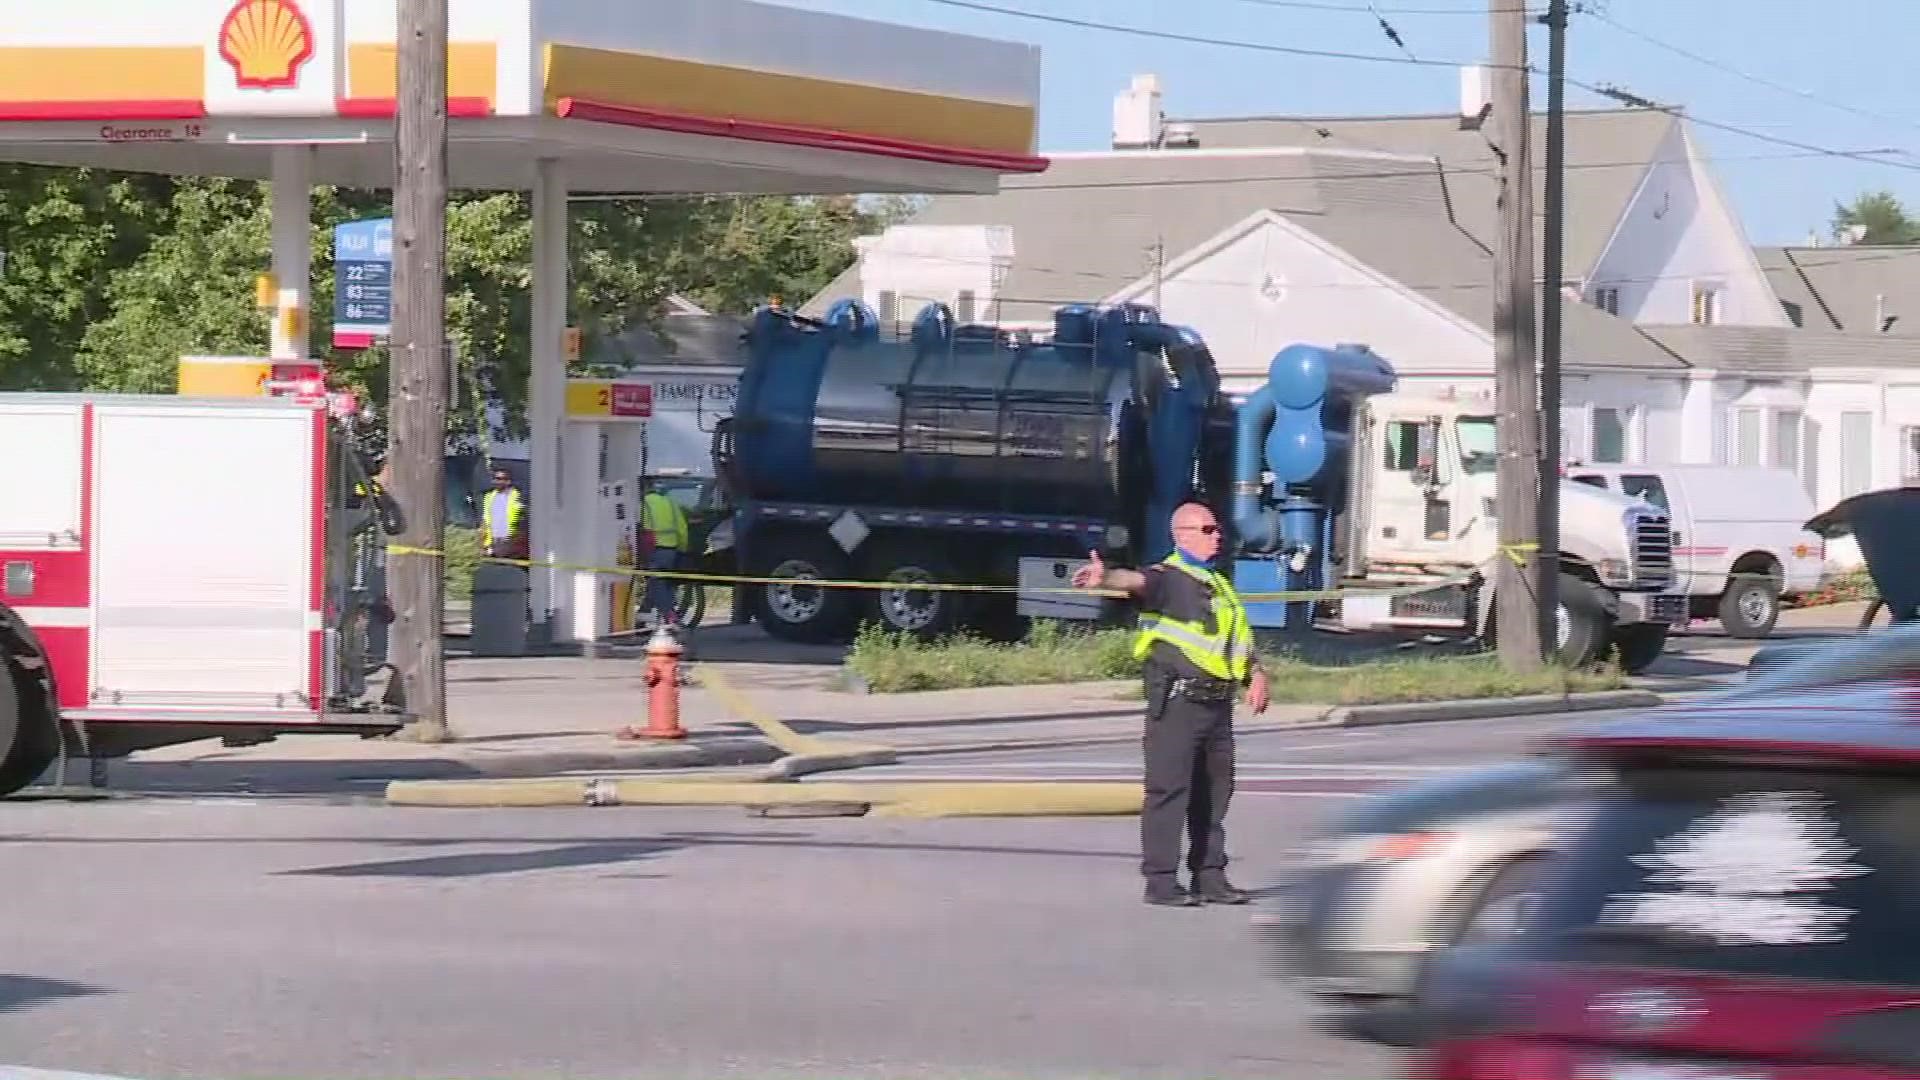 Cleveland Fire Companies responded to a HazMat emergency this afternoon at W. 150th and Lorain Ave. There were reports of a gasoline smell in the sewer.